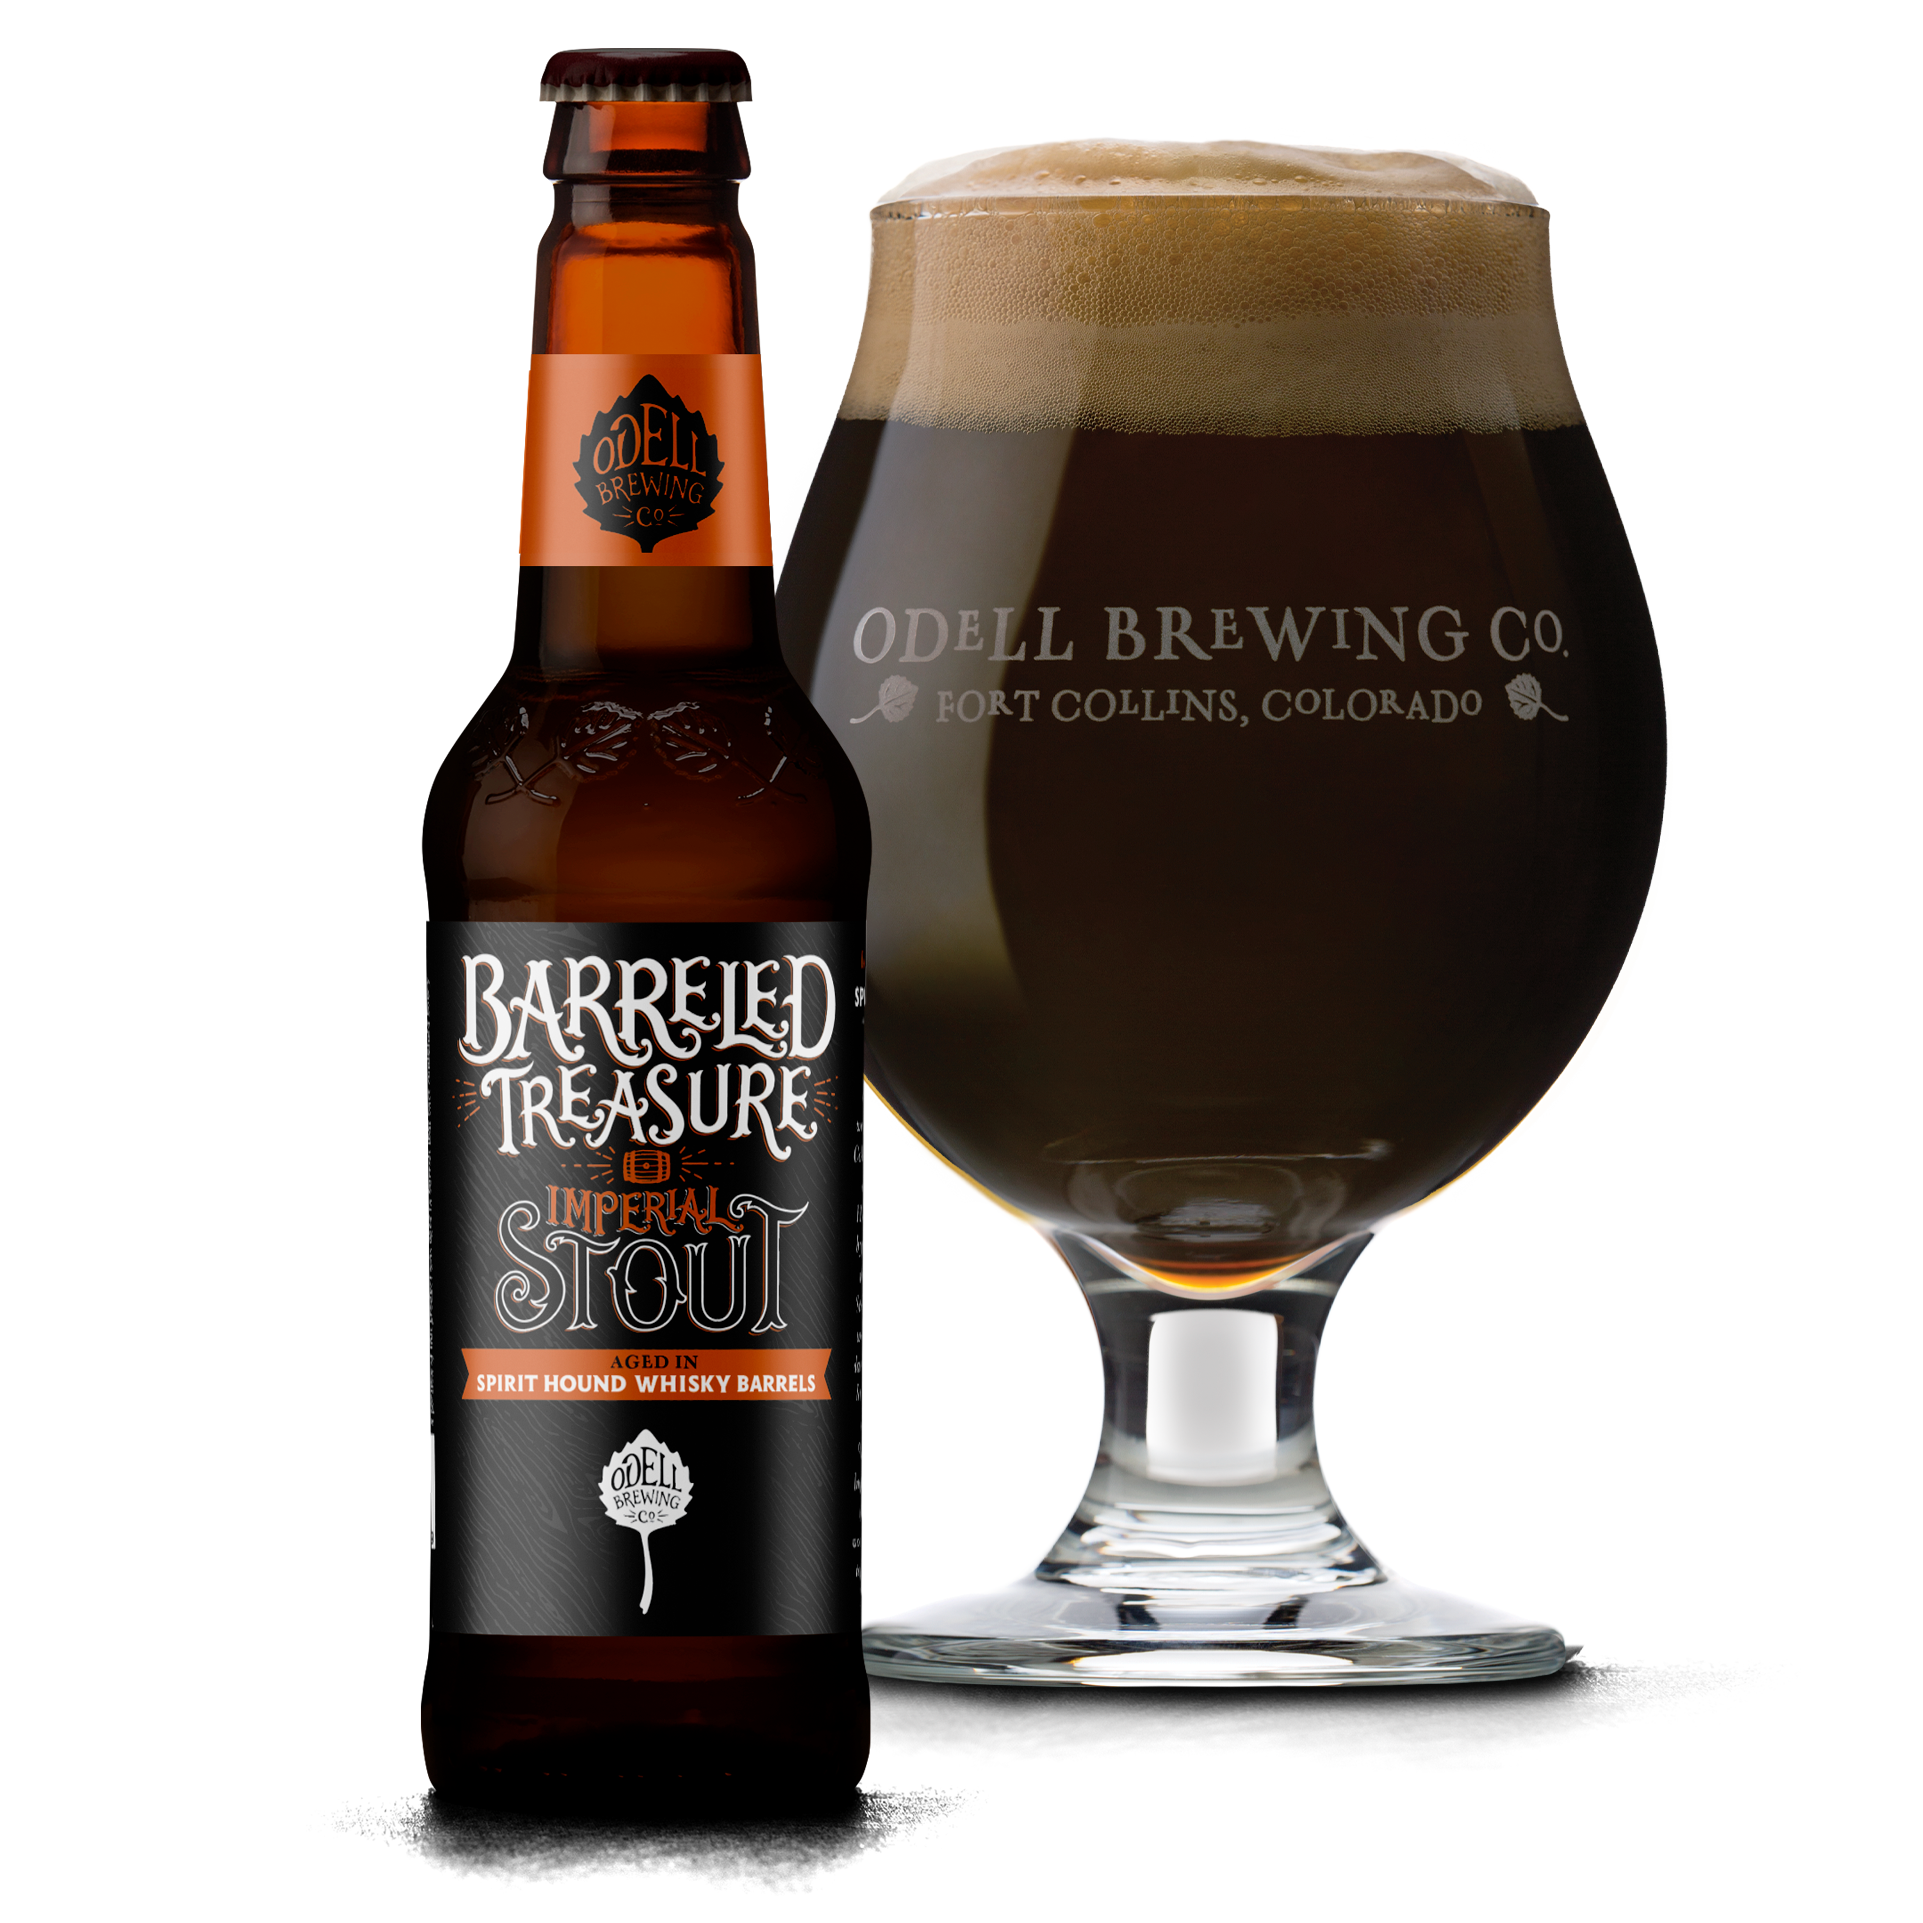 Odell Brewing Barrel Treasure Imperial Stout Aged in Spirit Hound Whisky Barrels Bottle and Pour